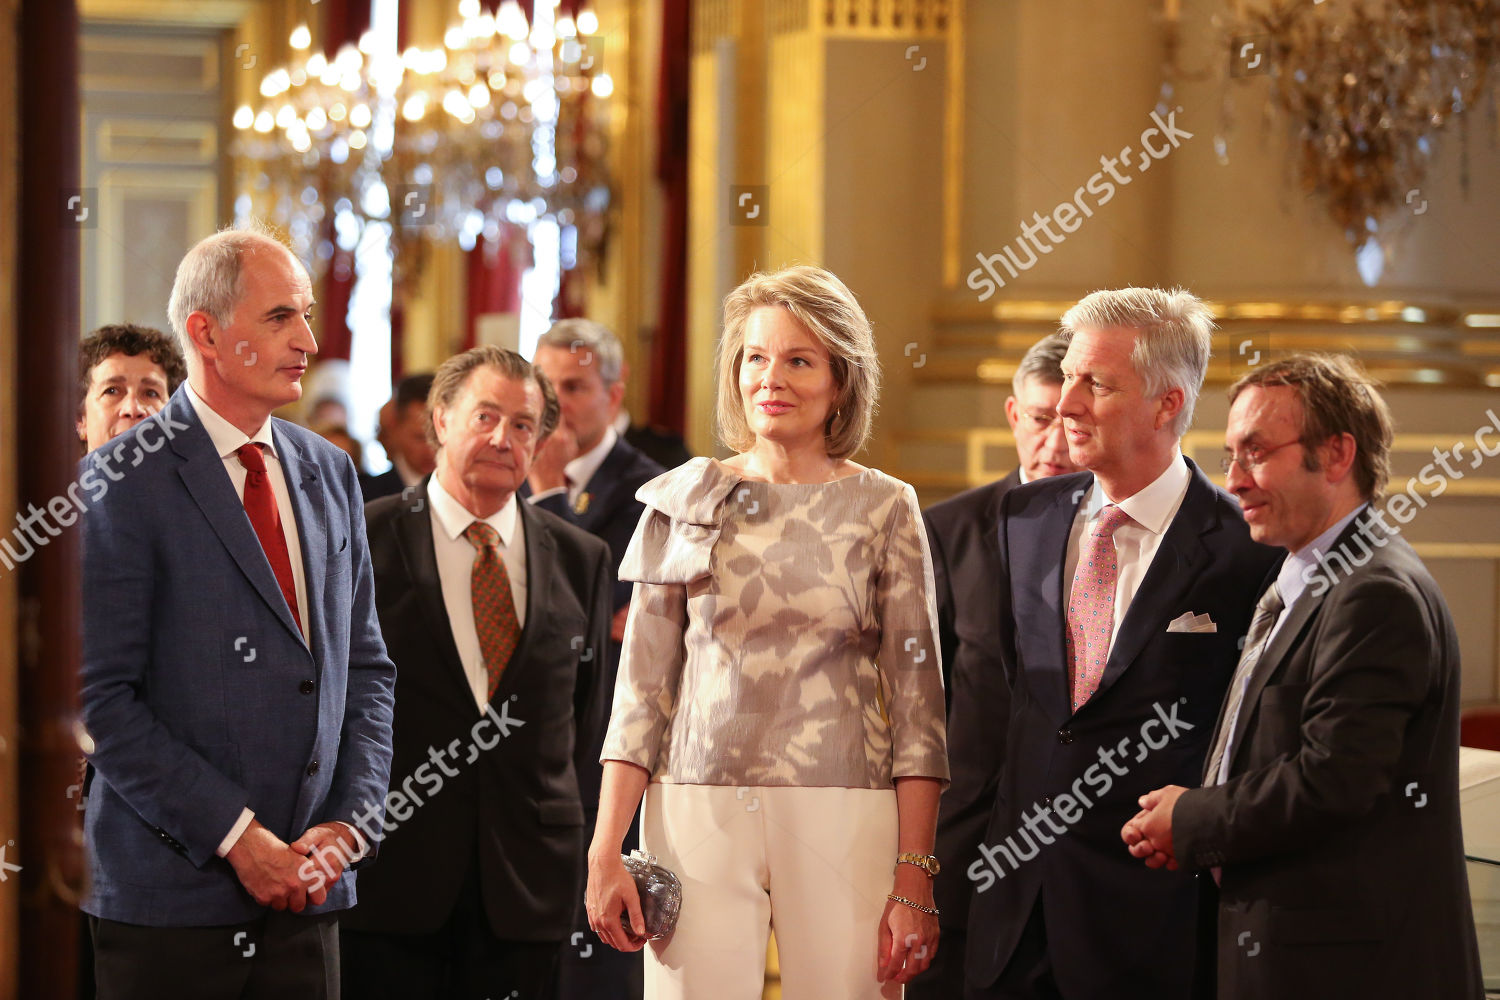 belgian-royals-summer-expo-at-the-royal-palace-brussels-belgium-shutterstock-editorial-10340779p.jpg